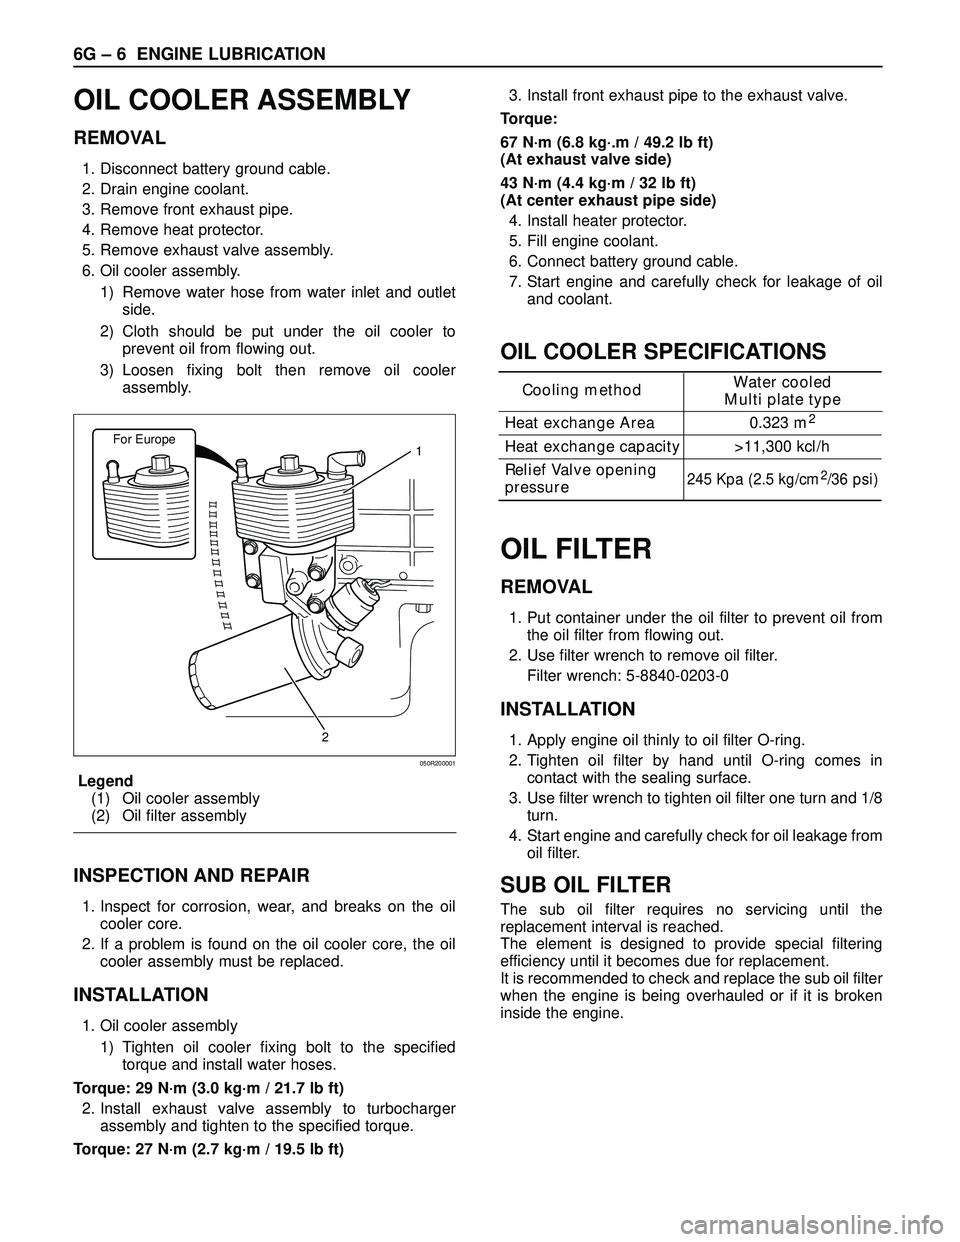 ISUZU TROOPER 1998  Service Owners Manual 6G – 6 ENGINE LUBRICATION
OIL COOLER ASSEMBLY
REMOVAL
1. Disconnect battery ground cable.
2. Drain engine coolant.
3. Remove front exhaust pipe.
4. Remove heat protector.
5. Remove exhaust valve ass